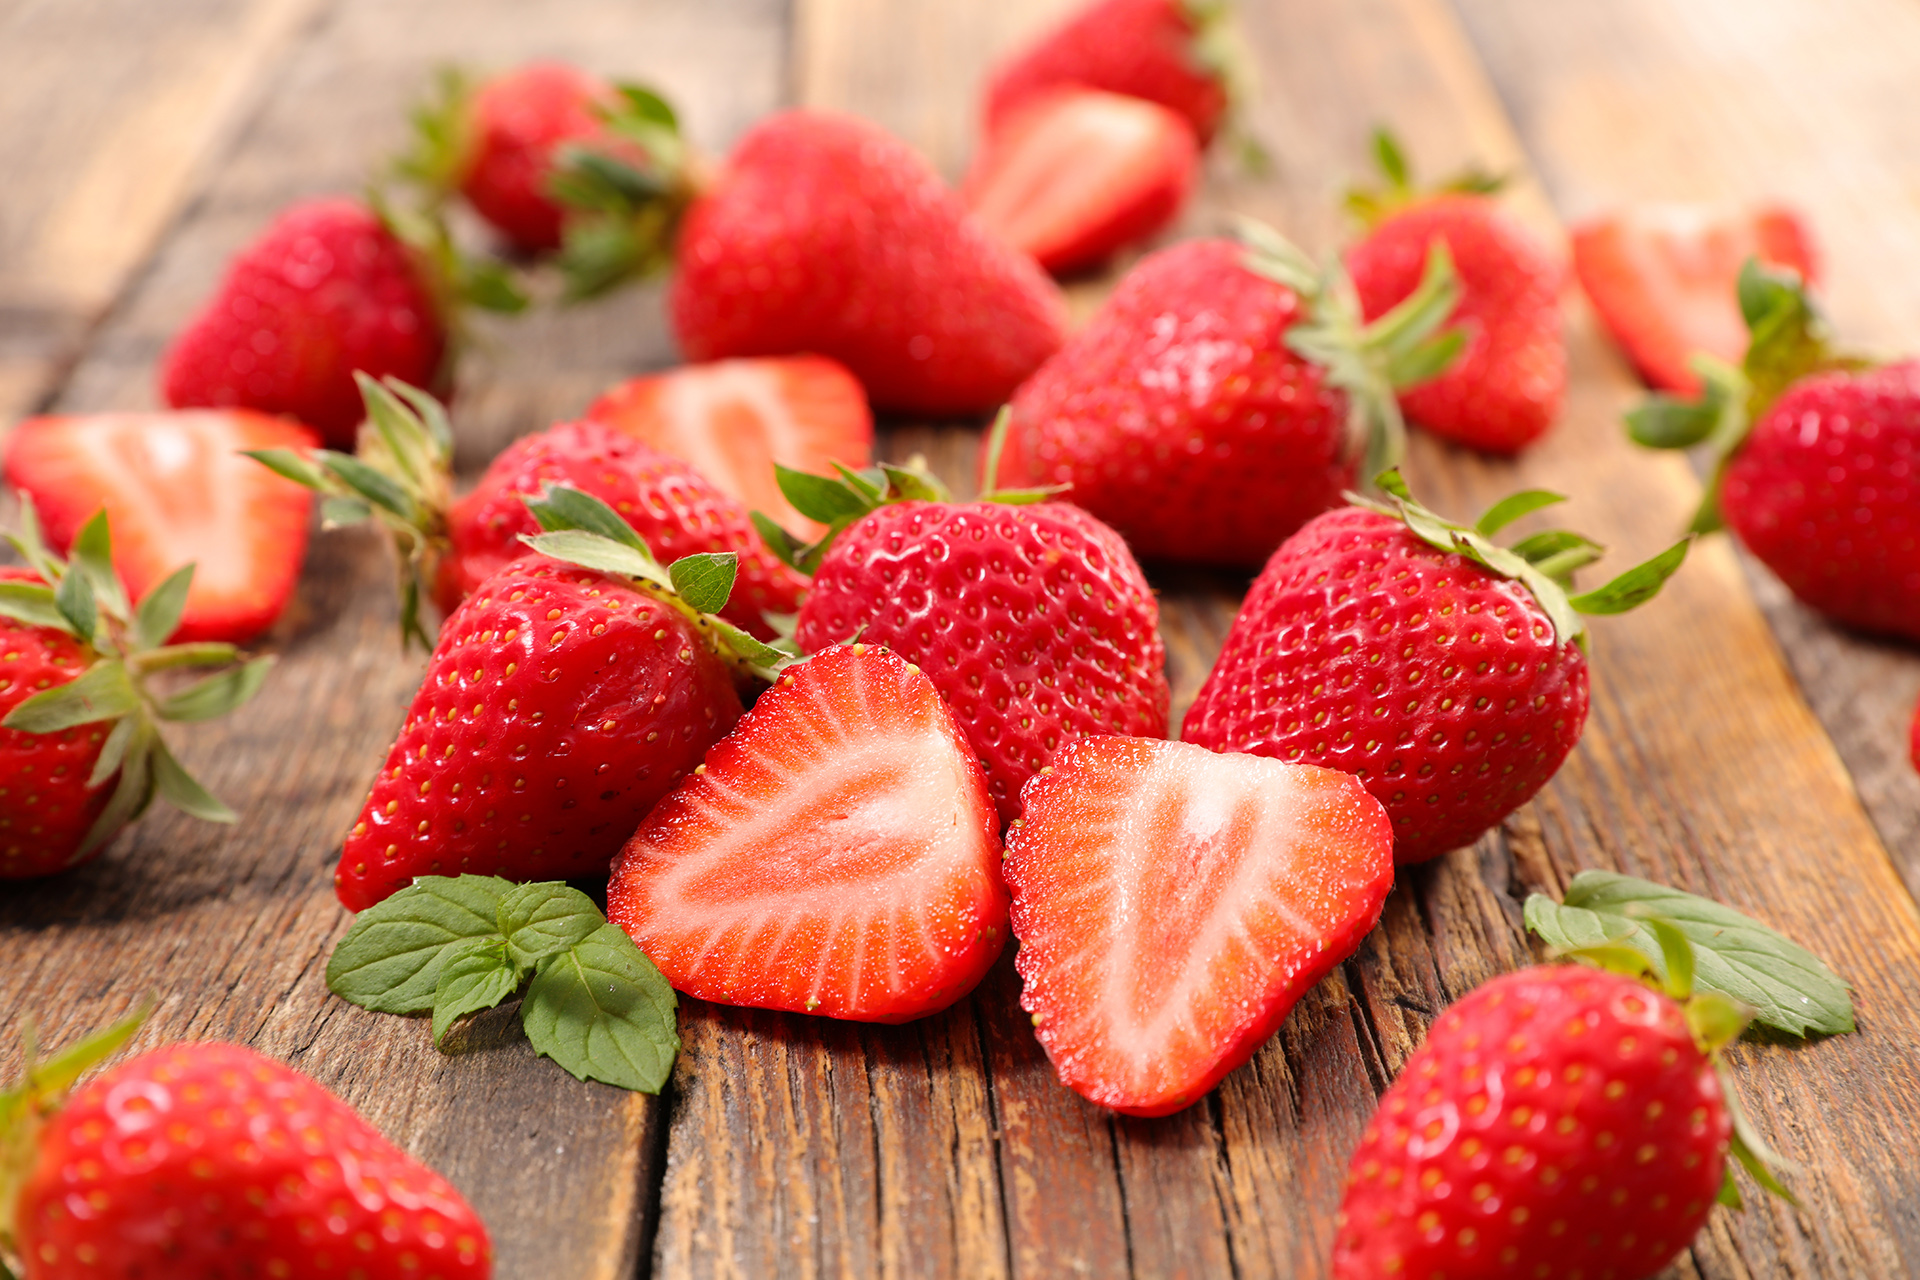 What Are the Benefits of Strawberries for Men?